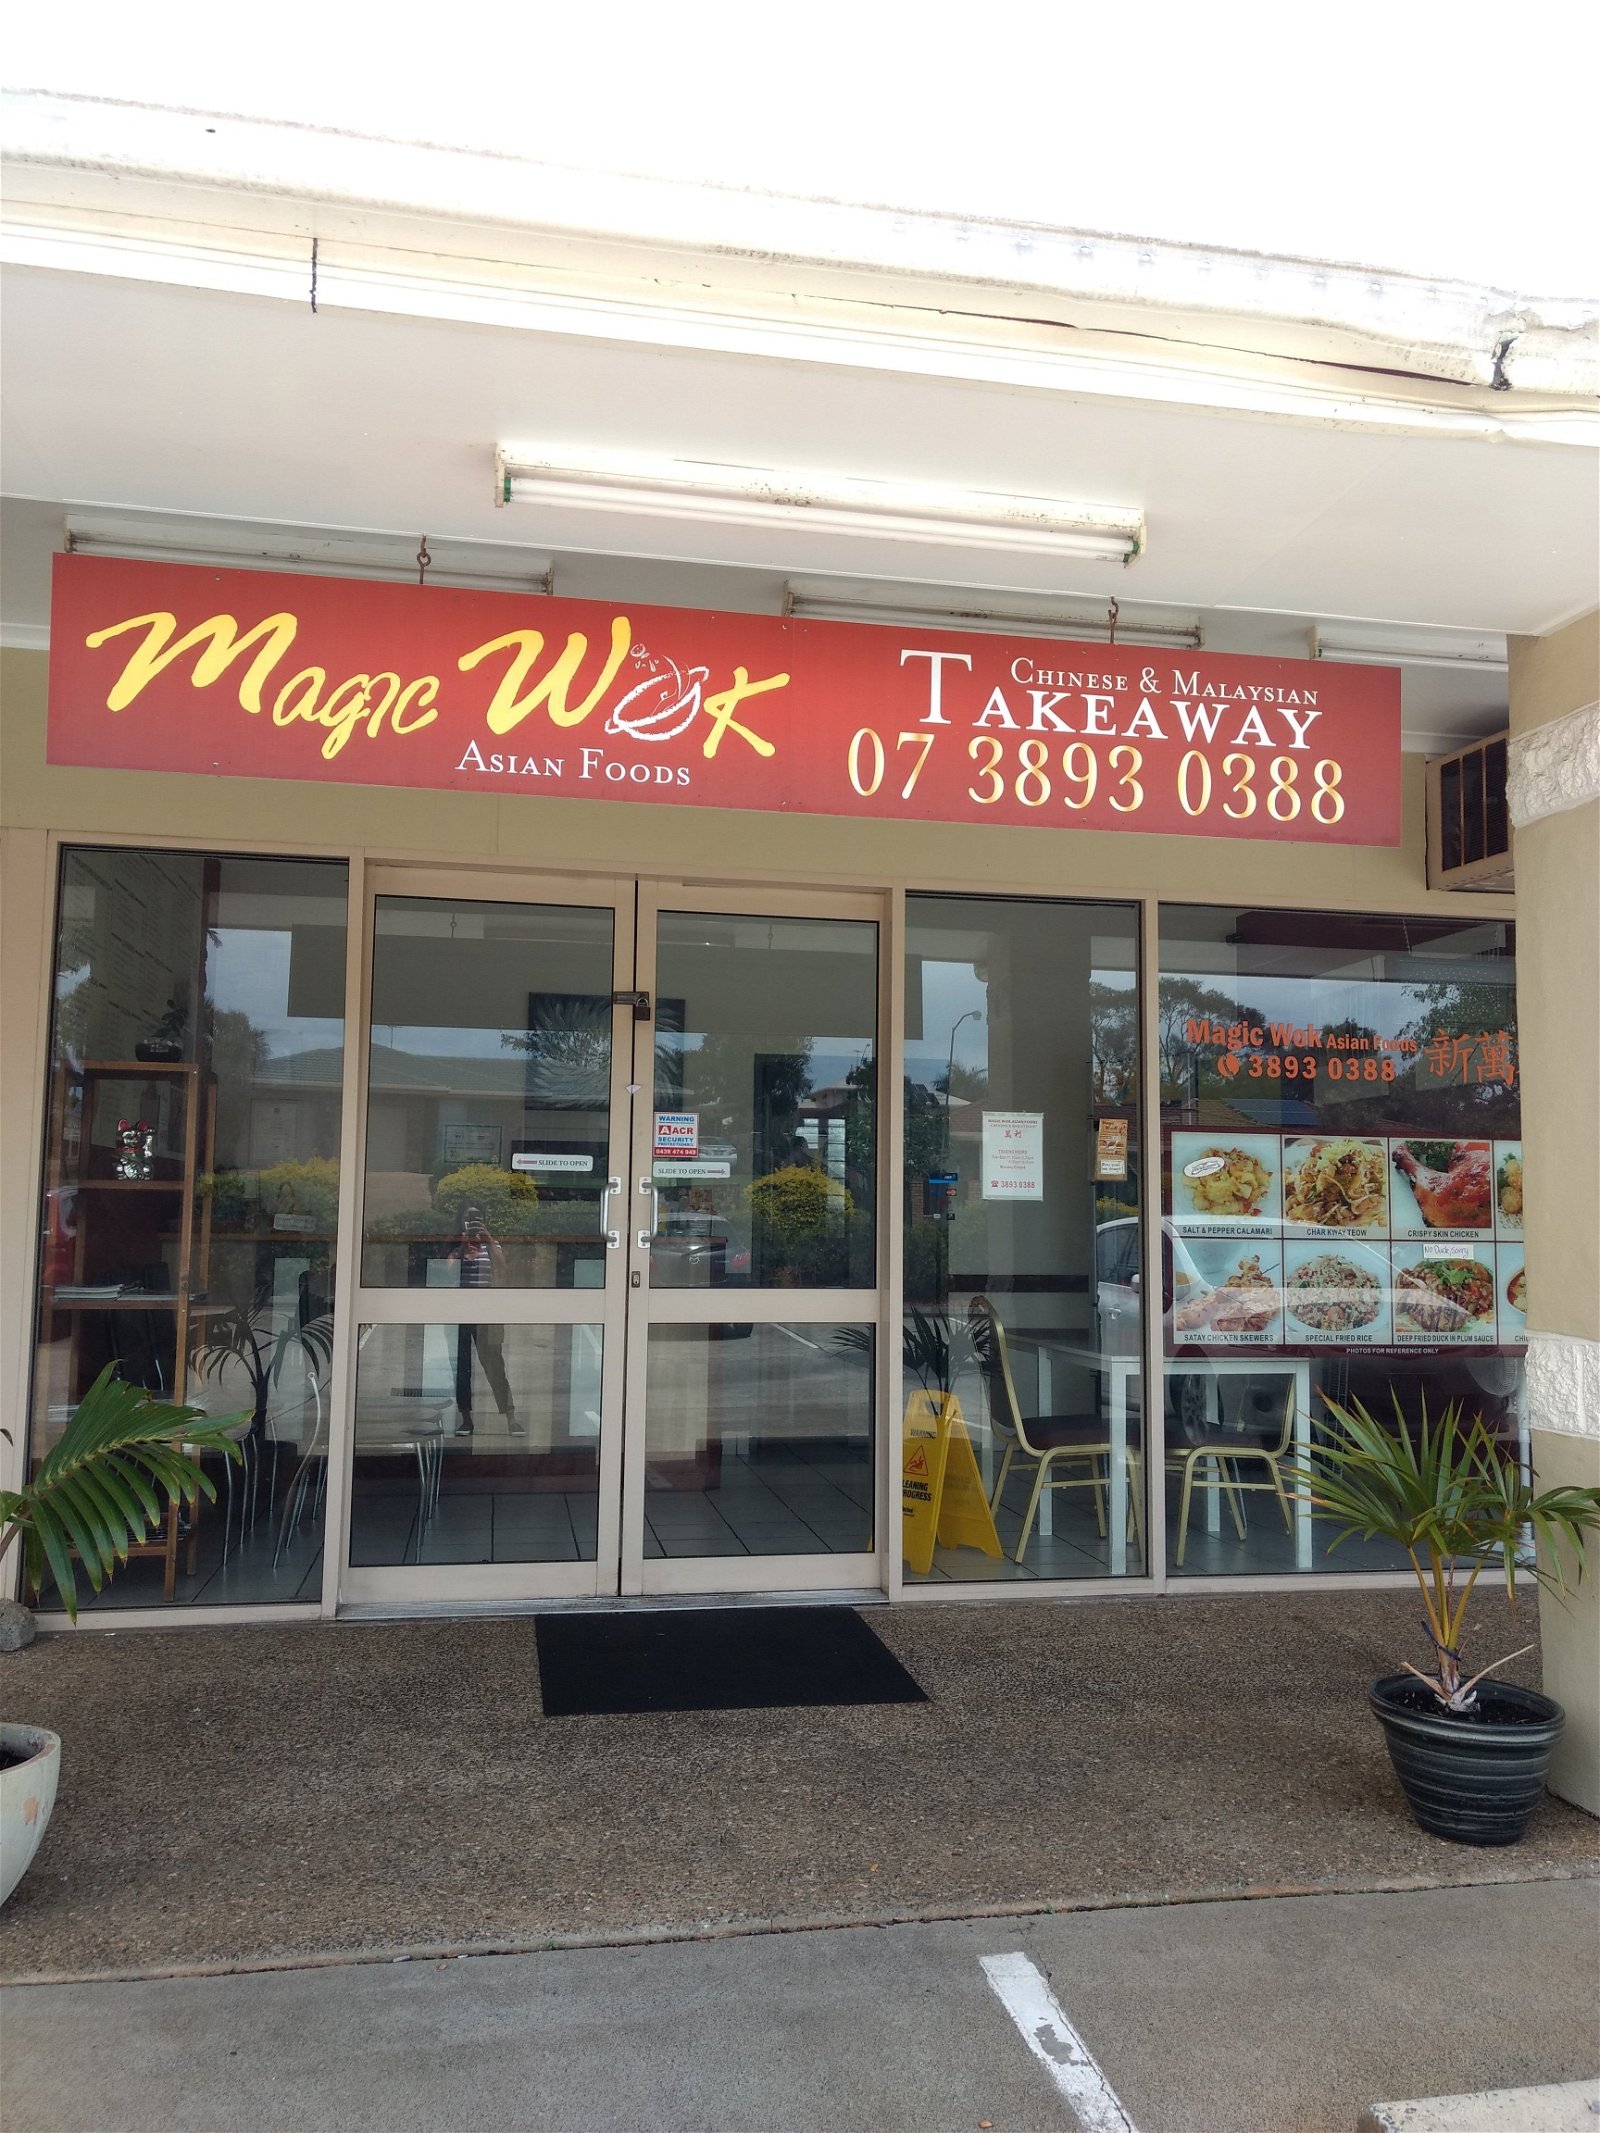 Magic Wok Asian Foods - Food Delivery Shop